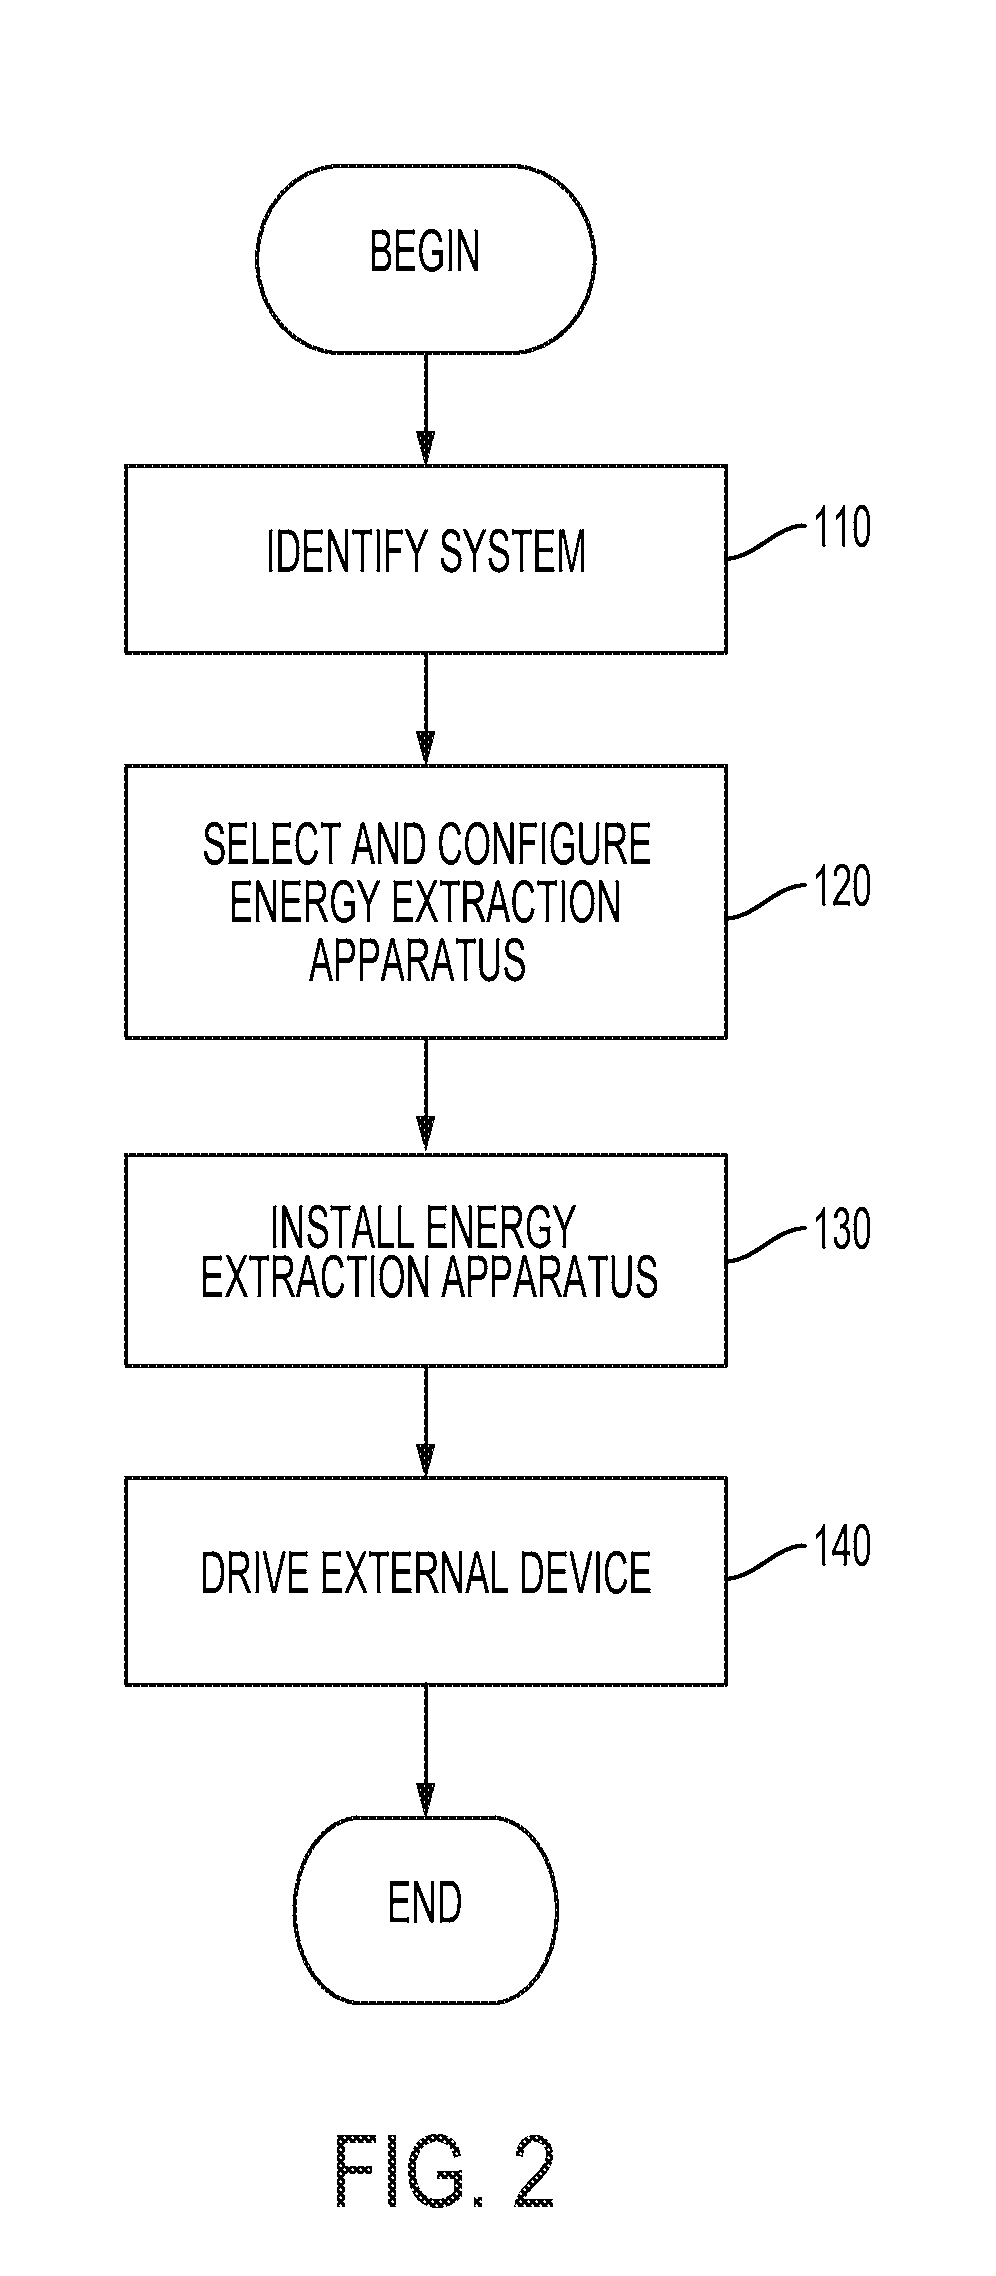 Energy extraction apparatus and method